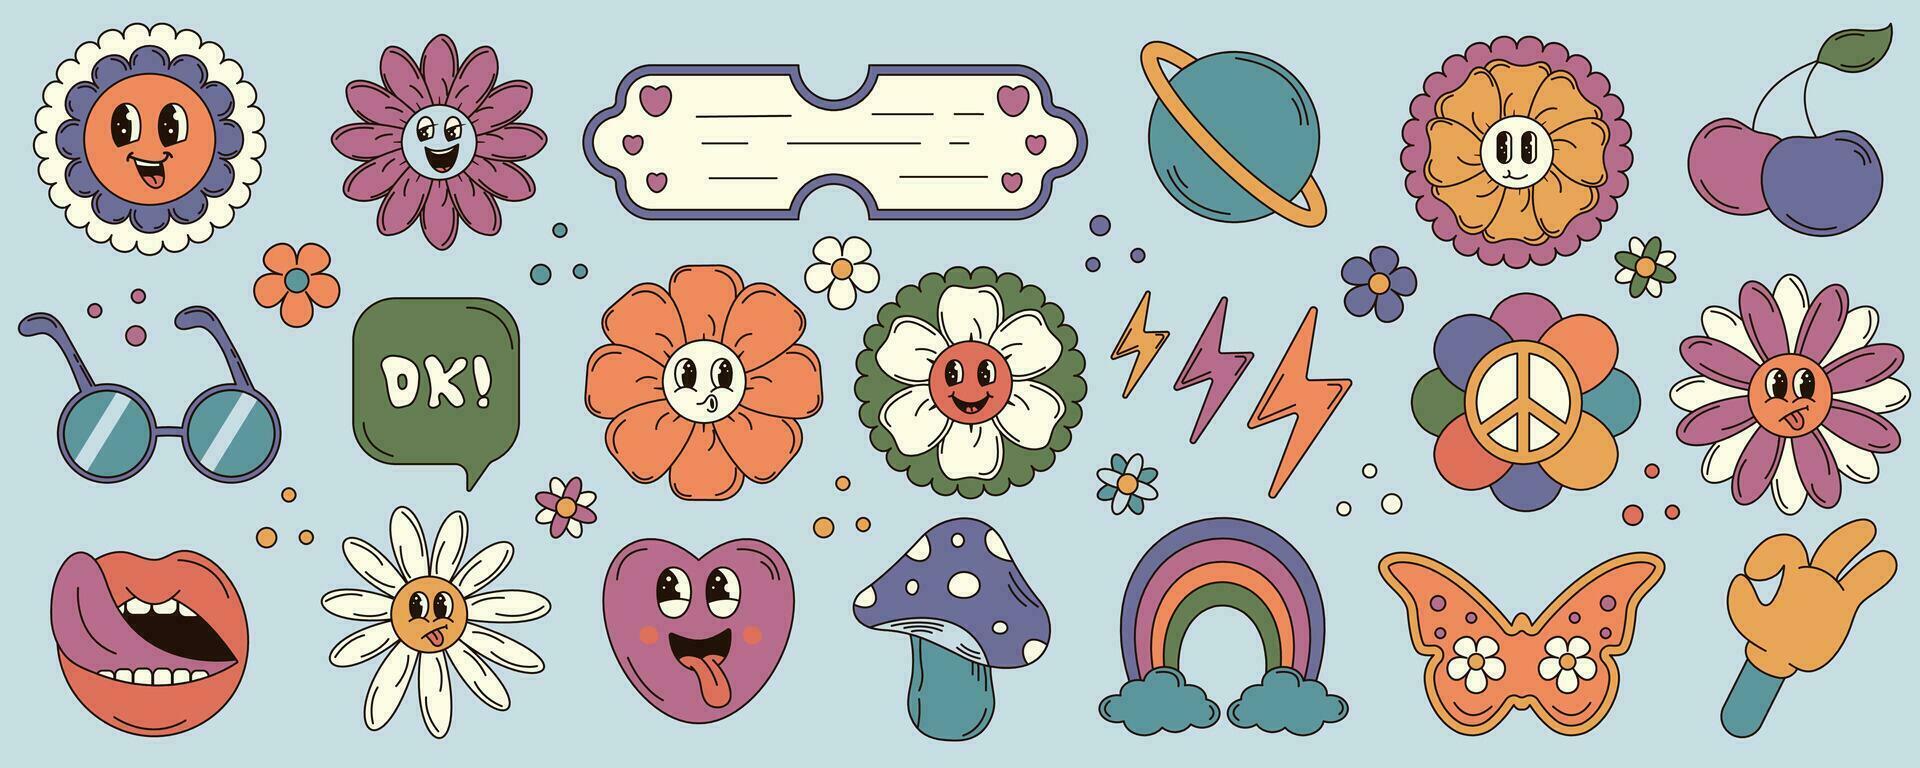 Modern set of groovy cartoon, psychedelic stickers flowers, heart, rainbow, clouds, cherry, emotions, face. Trippy emoticons for social networks, web design. Vector illustration.